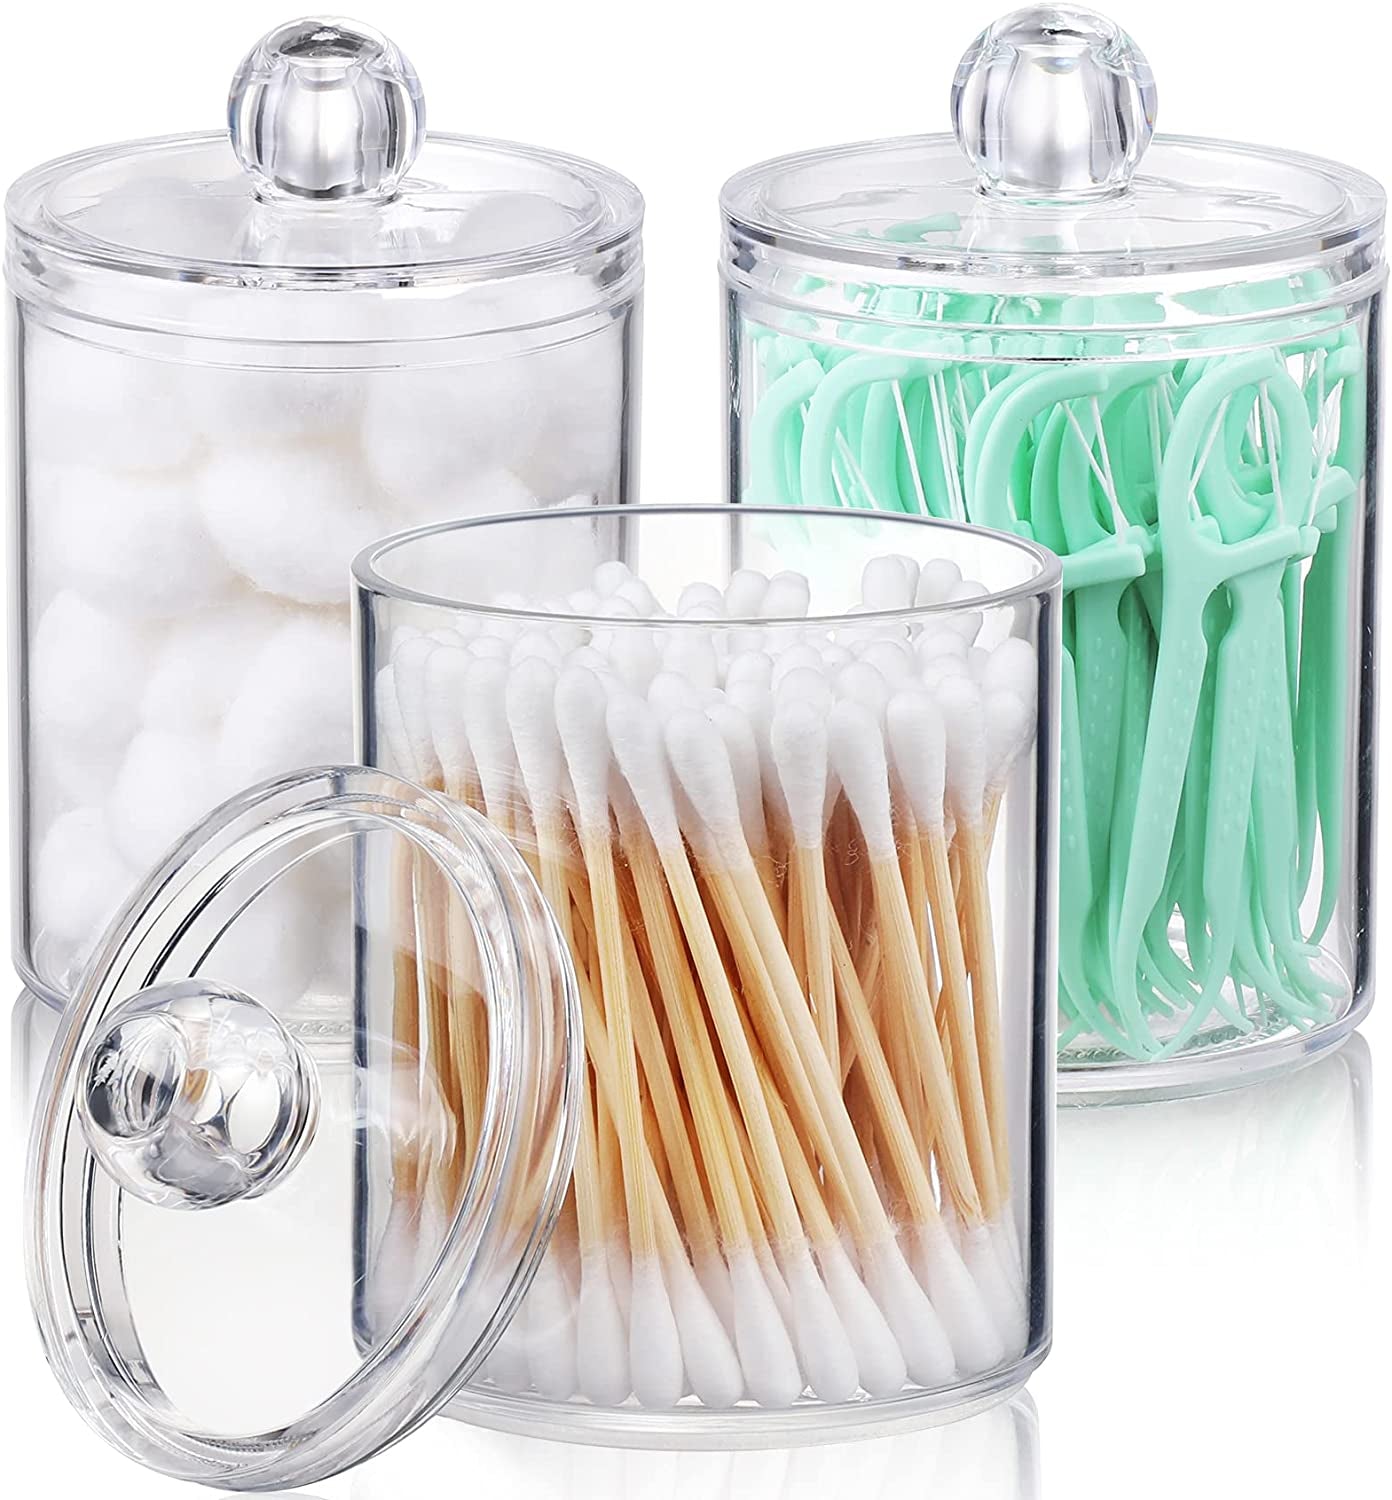 4 PACK Qtip Holder Dispenser for Cotton Ball, Cotton Swab, Cotton round Pads, Floss Picks - 10 Oz Clear Plastic Apothecary Jar Set for Bathroom Canister Storage Organization, Vanity Makeup Organizer